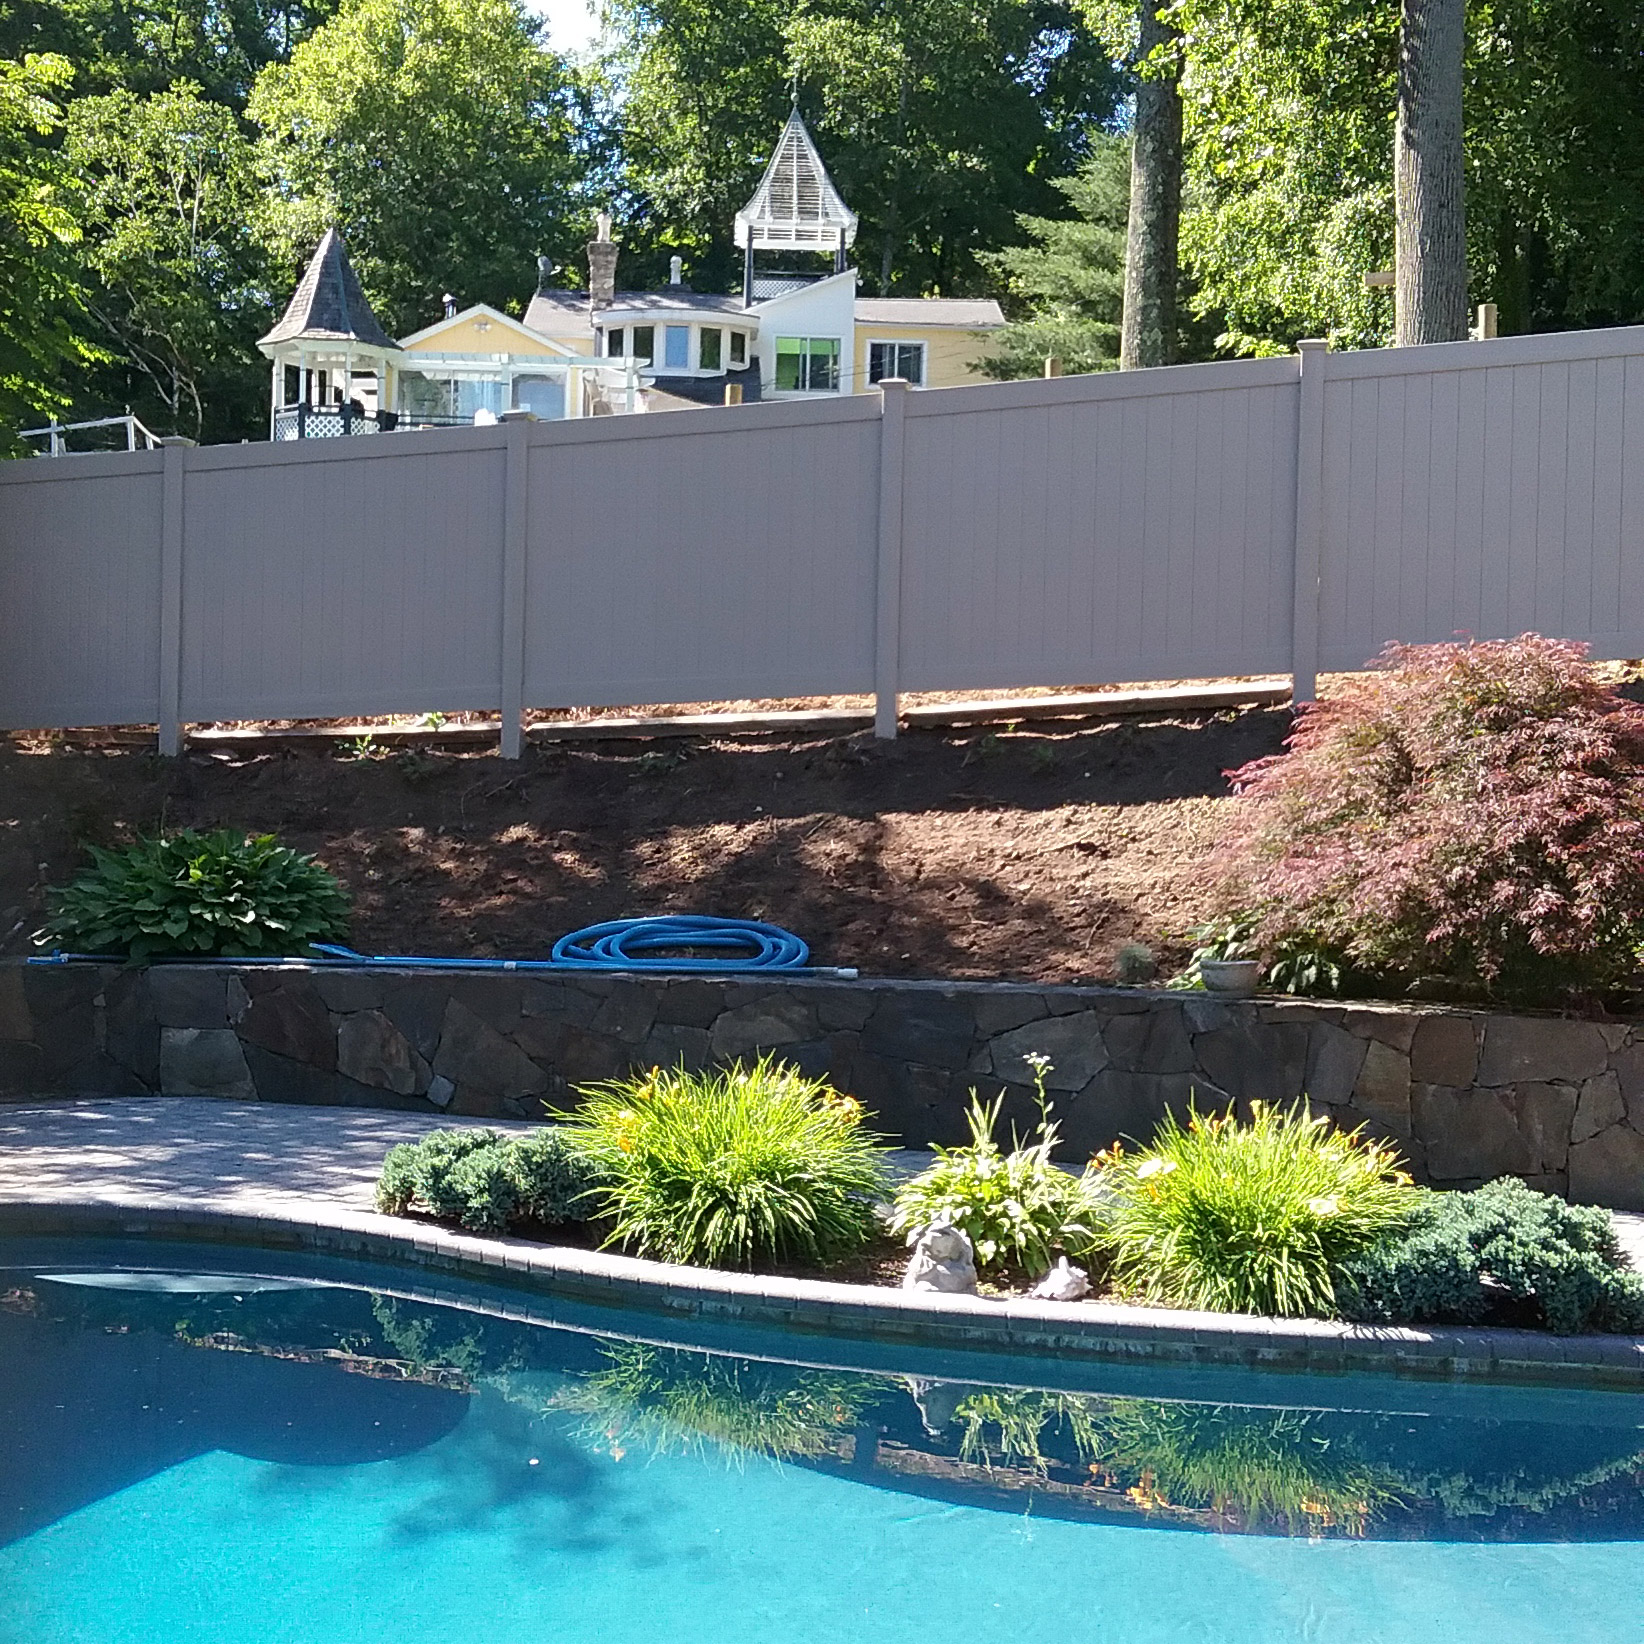 A pool with a reliable installation of a fence for enhanced safety, surrounded by trees.